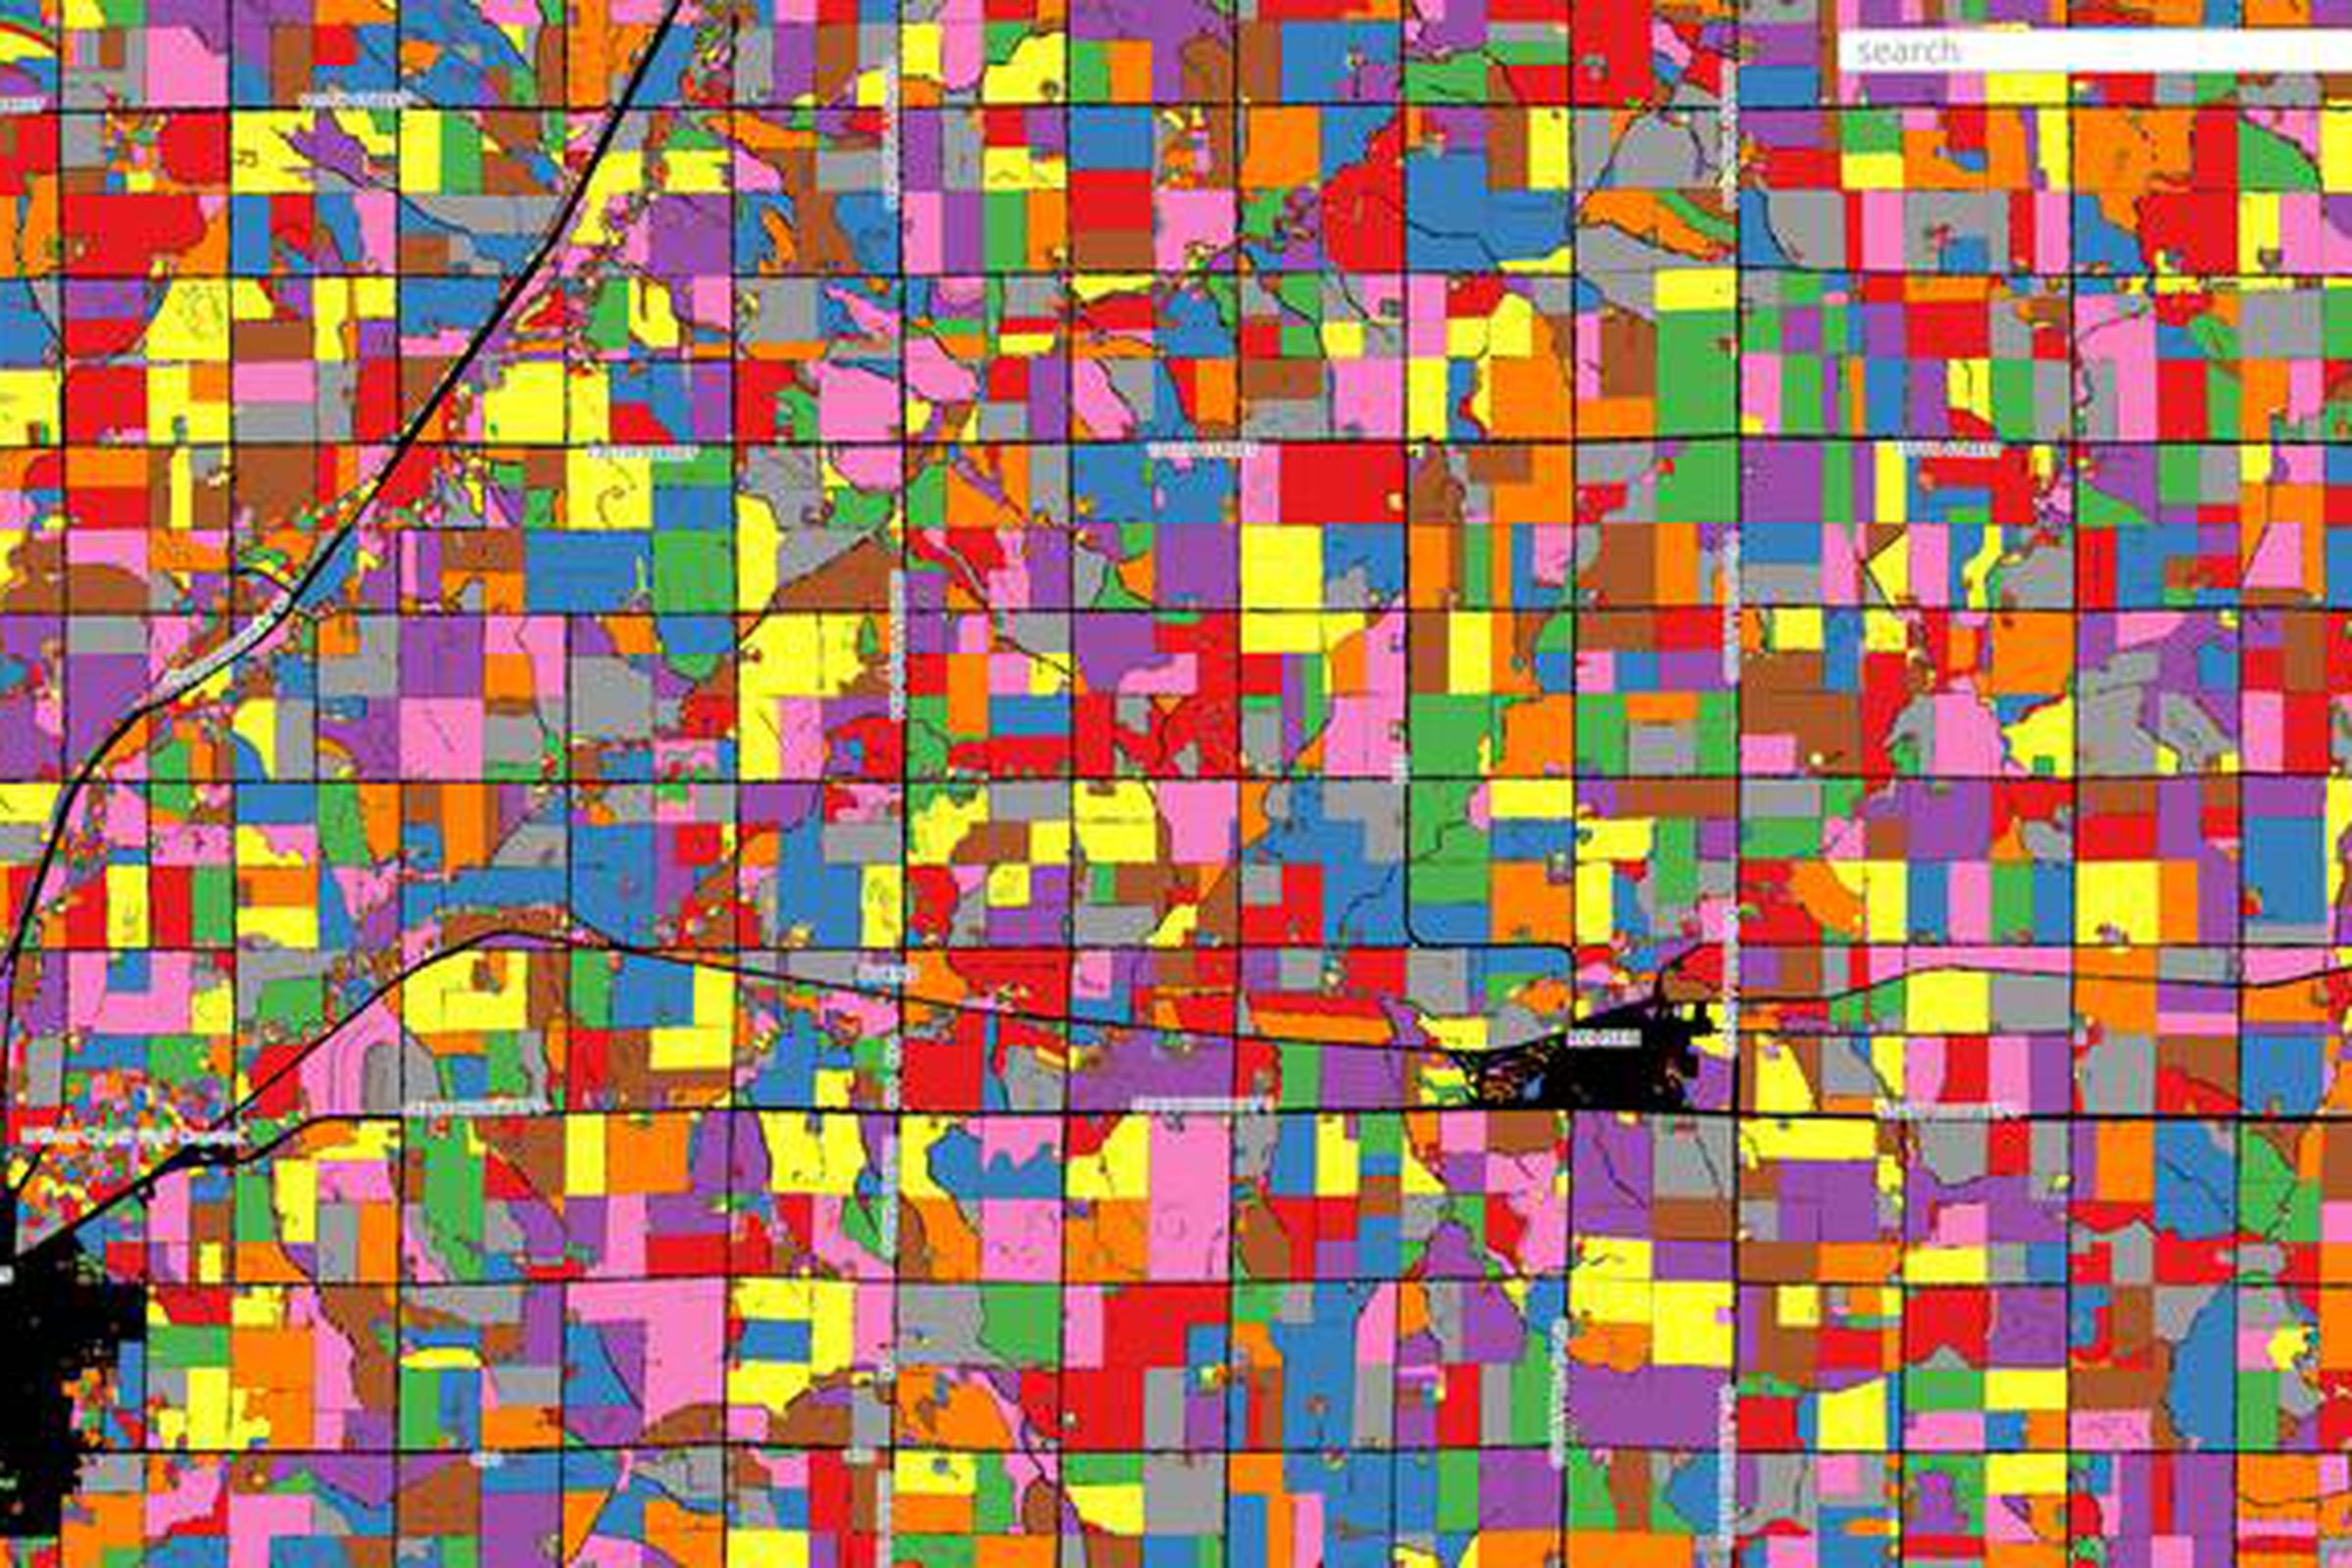 Descartes uses machine learning to segment different crop fields